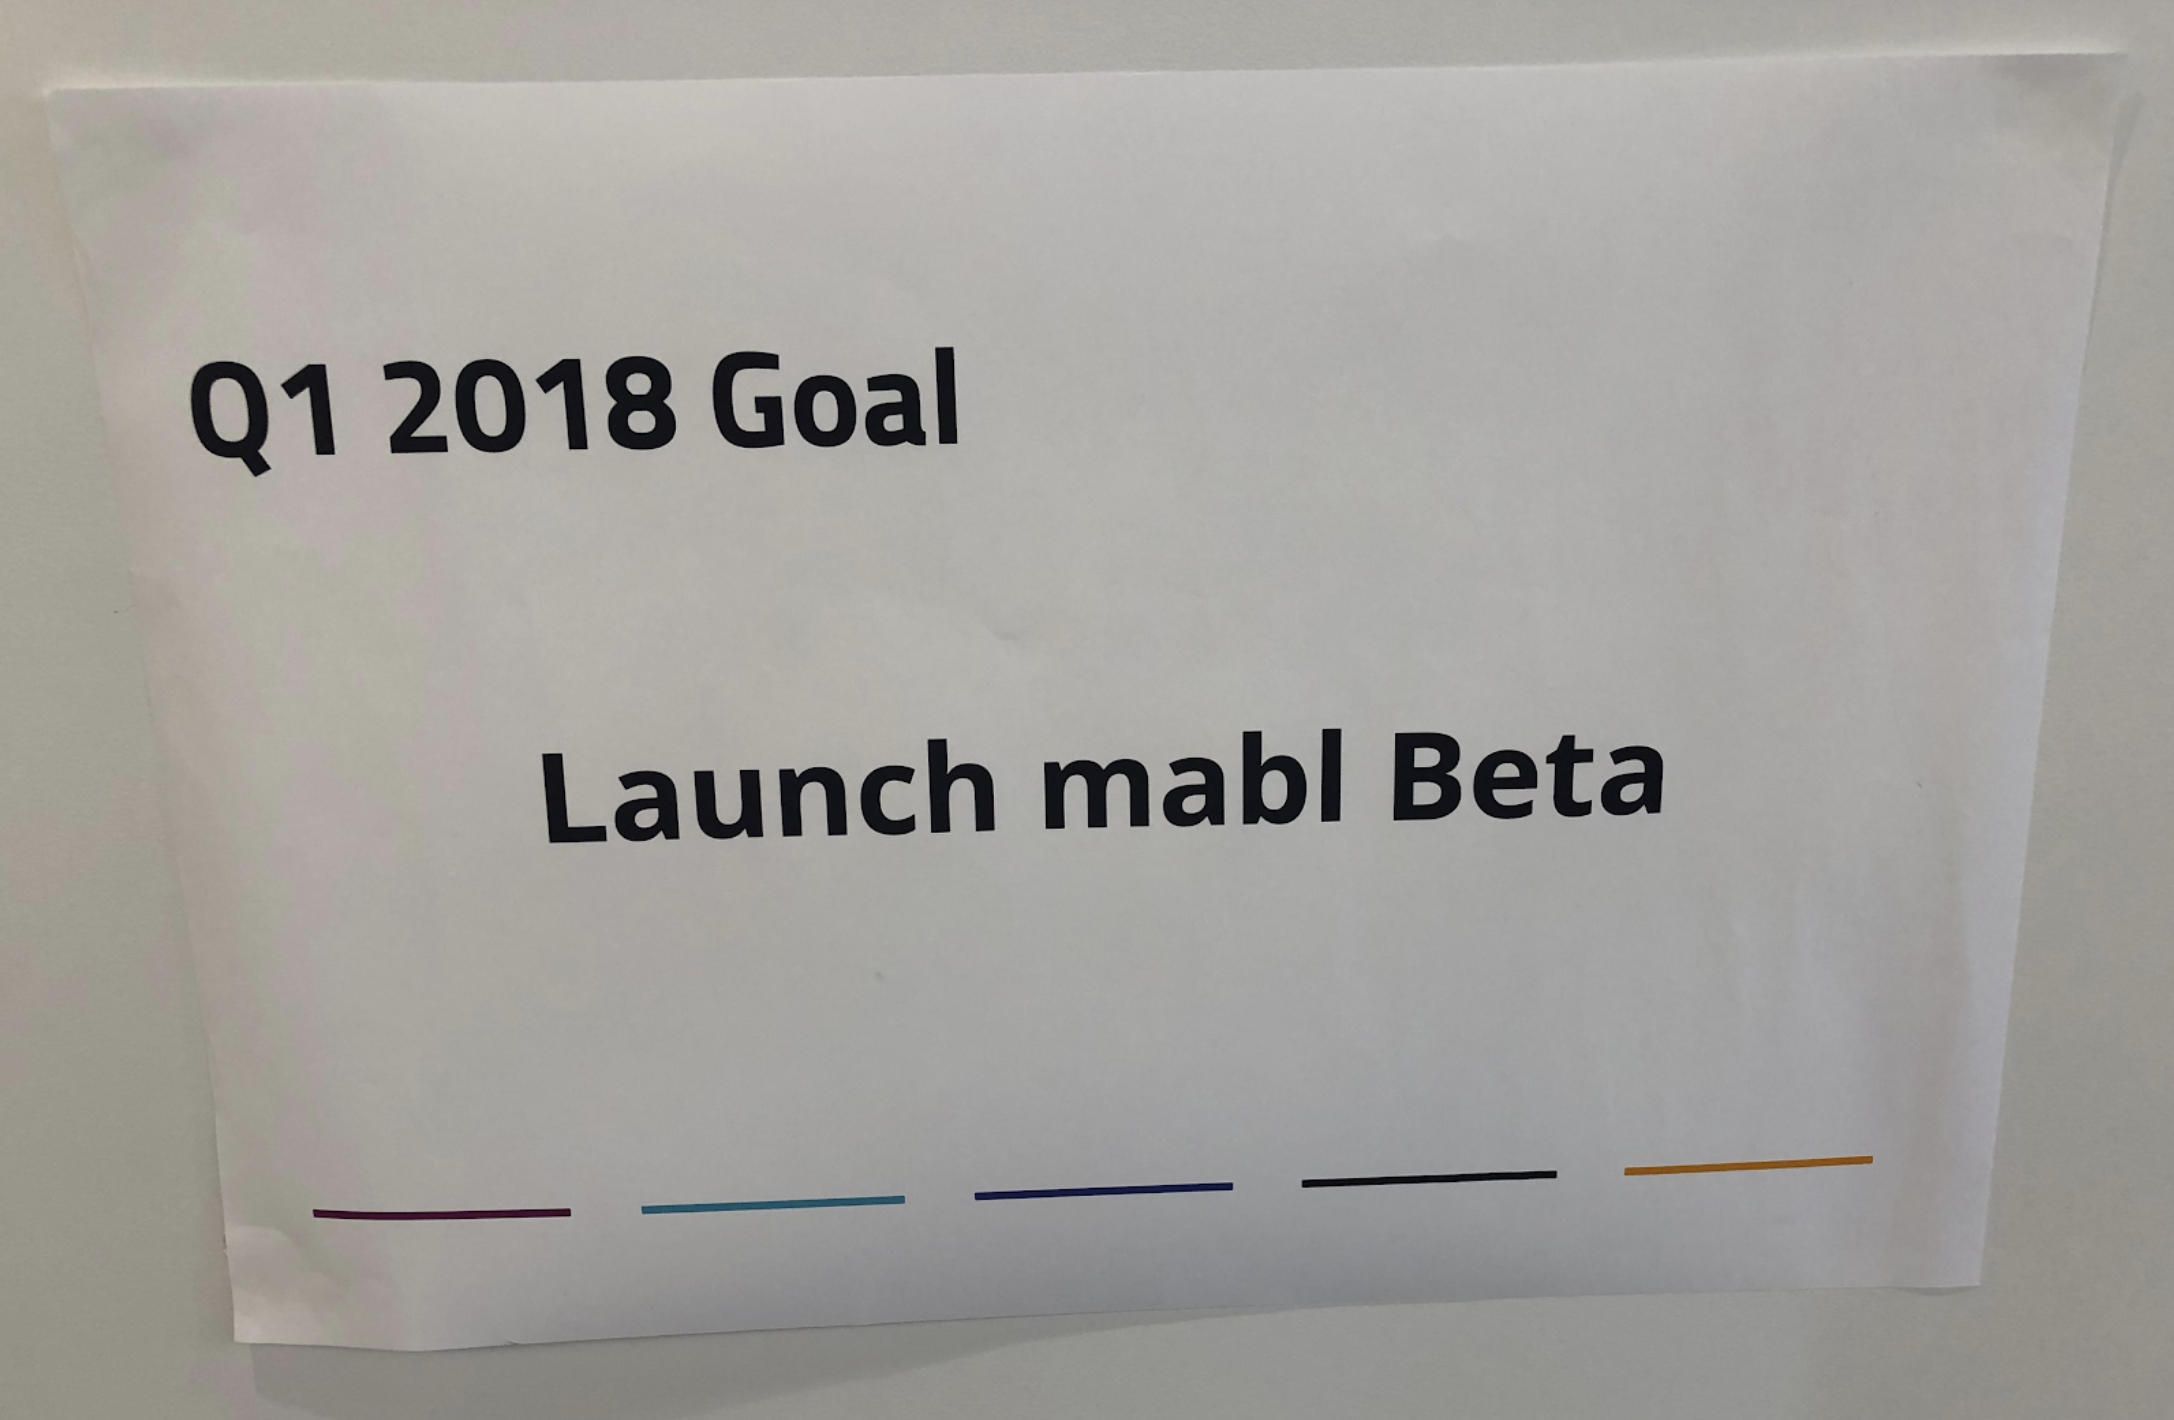 A sheet of paper that says Q1 2018 Goal Launch mabl Beta.